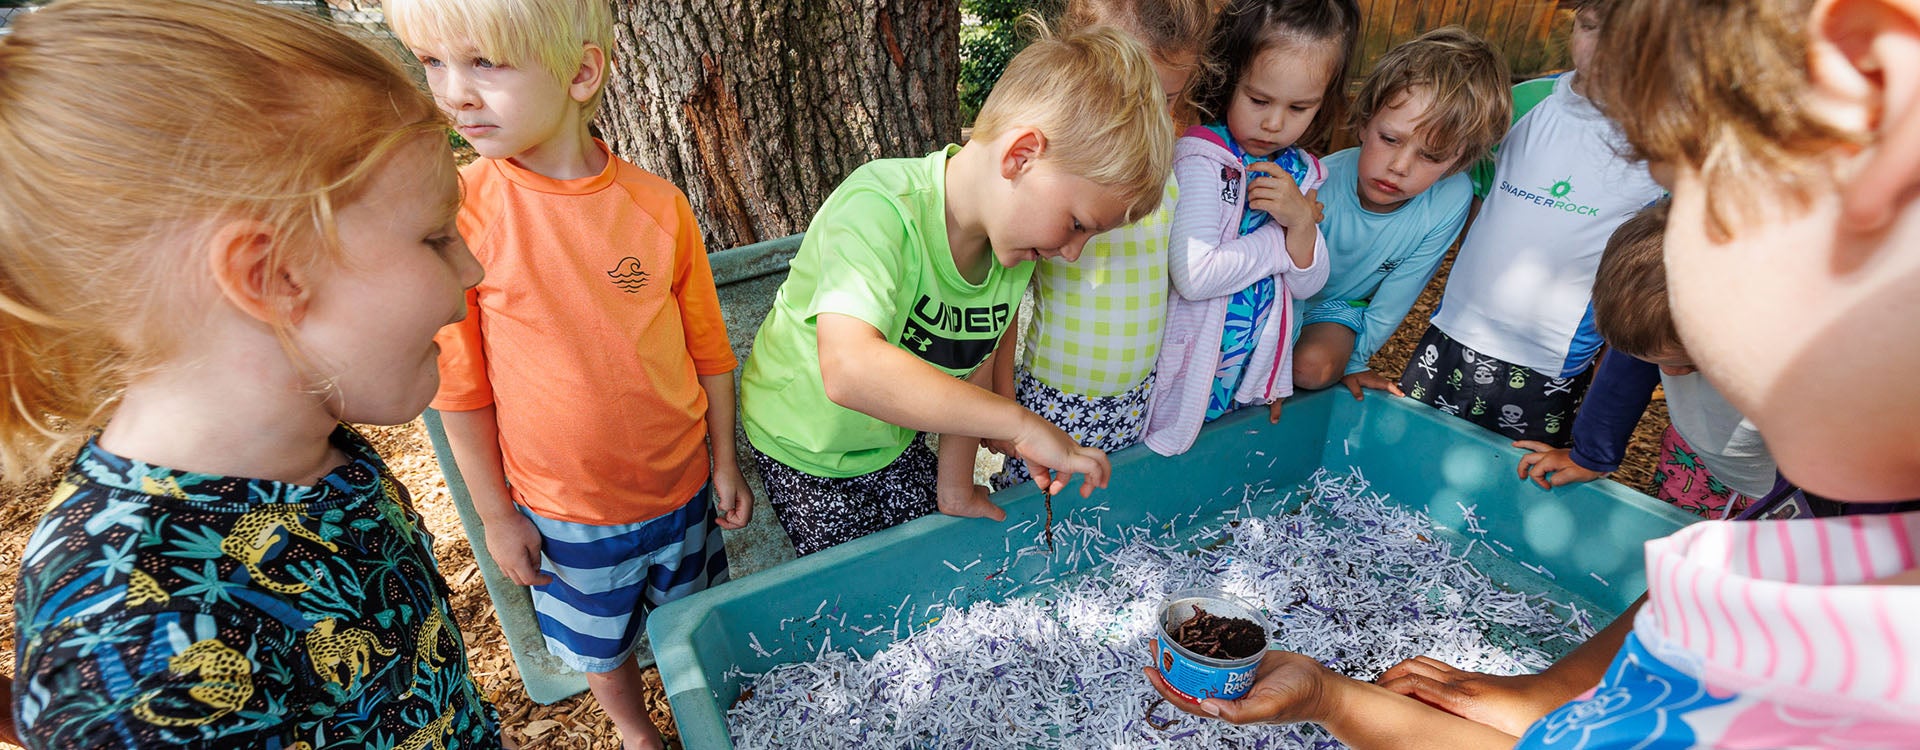 Students at the Nancy Darden Child Development Center look at worms being use to make compost. The compost will be put in the garden at the center.